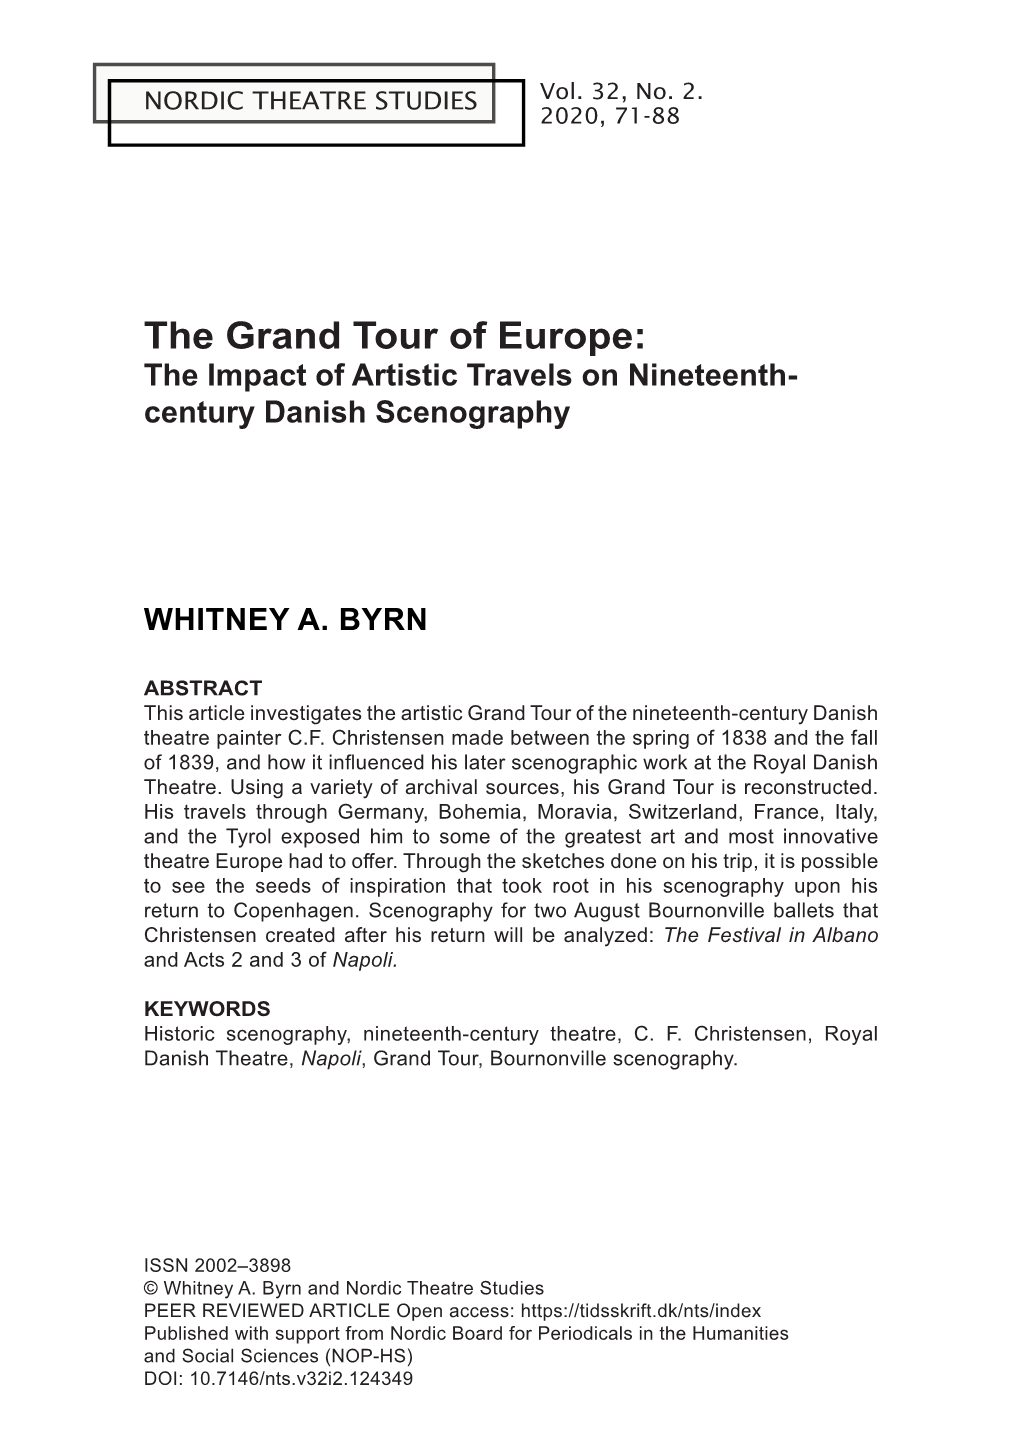 The Grand Tour of Europe: the Impact of Artistic Travels on Nineteenth- Century Danish Scenography